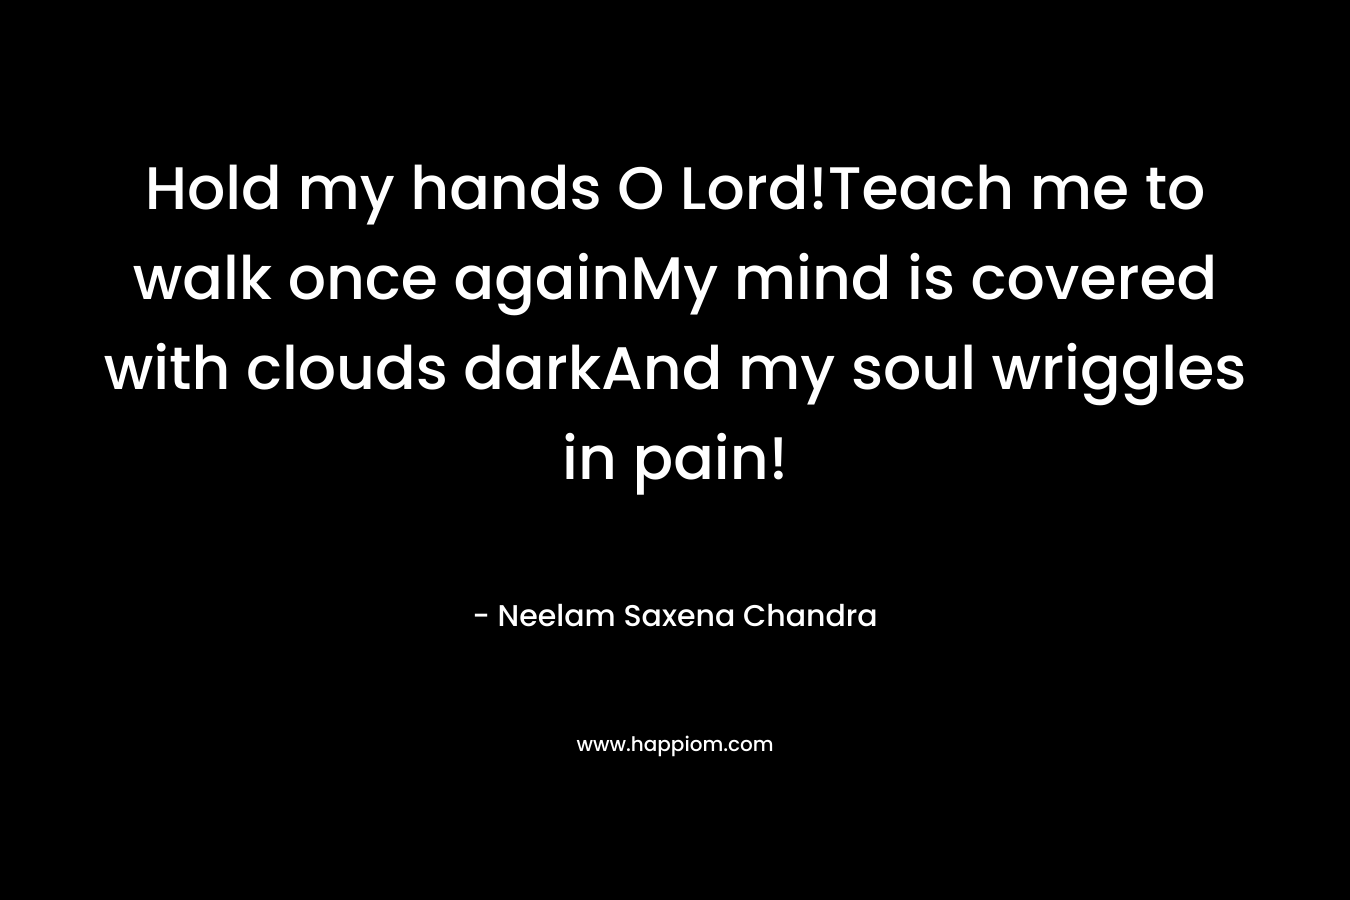 Hold my hands O Lord!Teach me to walk once againMy mind is covered with clouds darkAnd my soul wriggles in pain! – Neelam Saxena Chandra